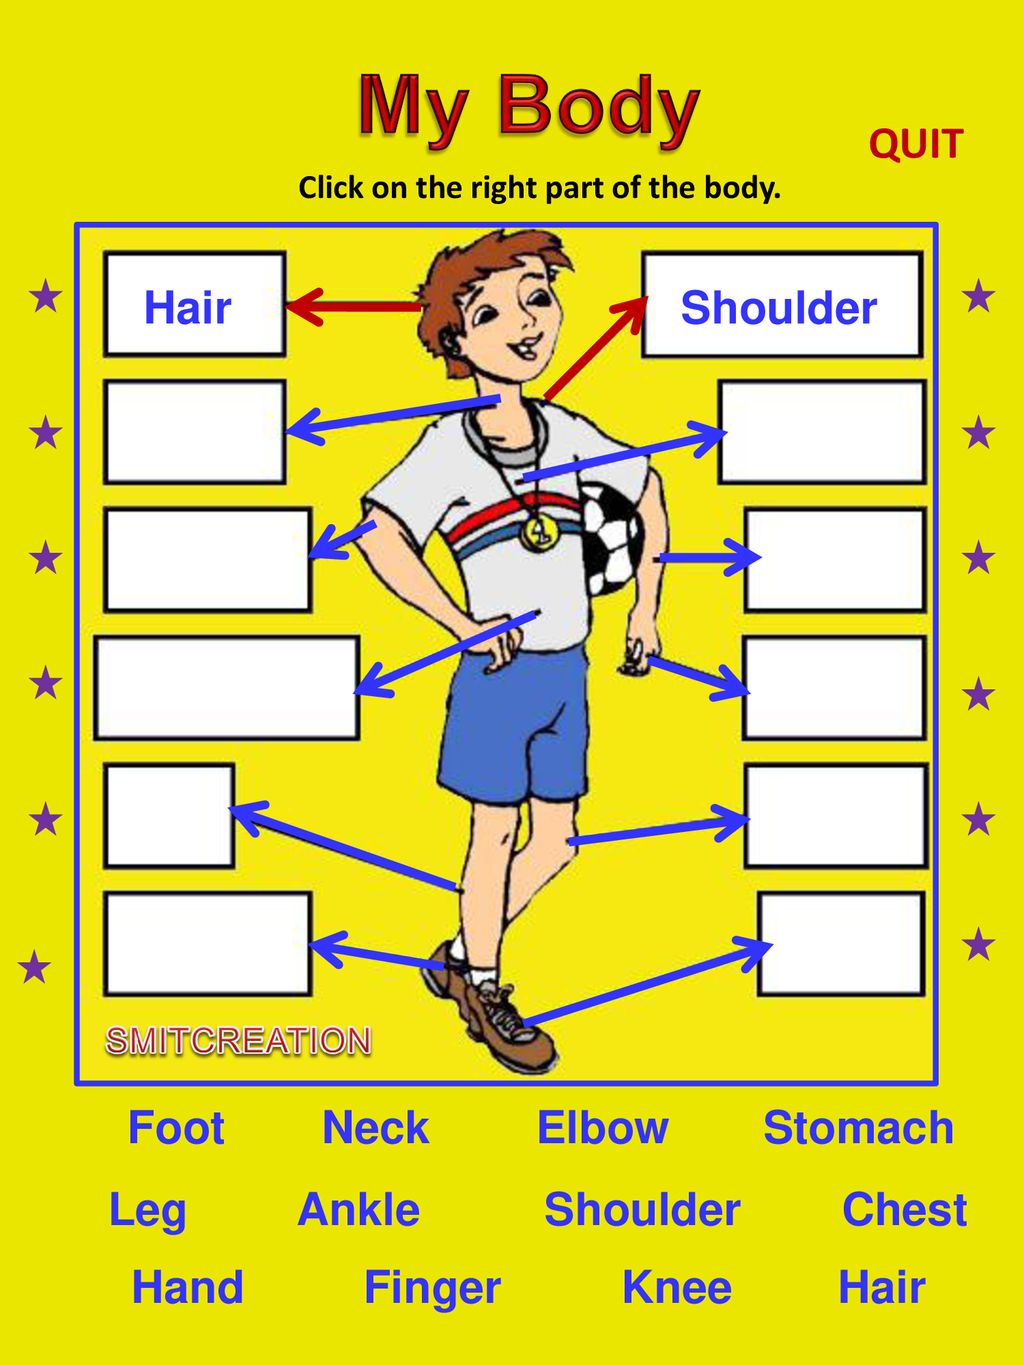 We can body. My body, your body: hair. Body Parts на английском. Parts of the body презентация. Parts of the body упражнения.